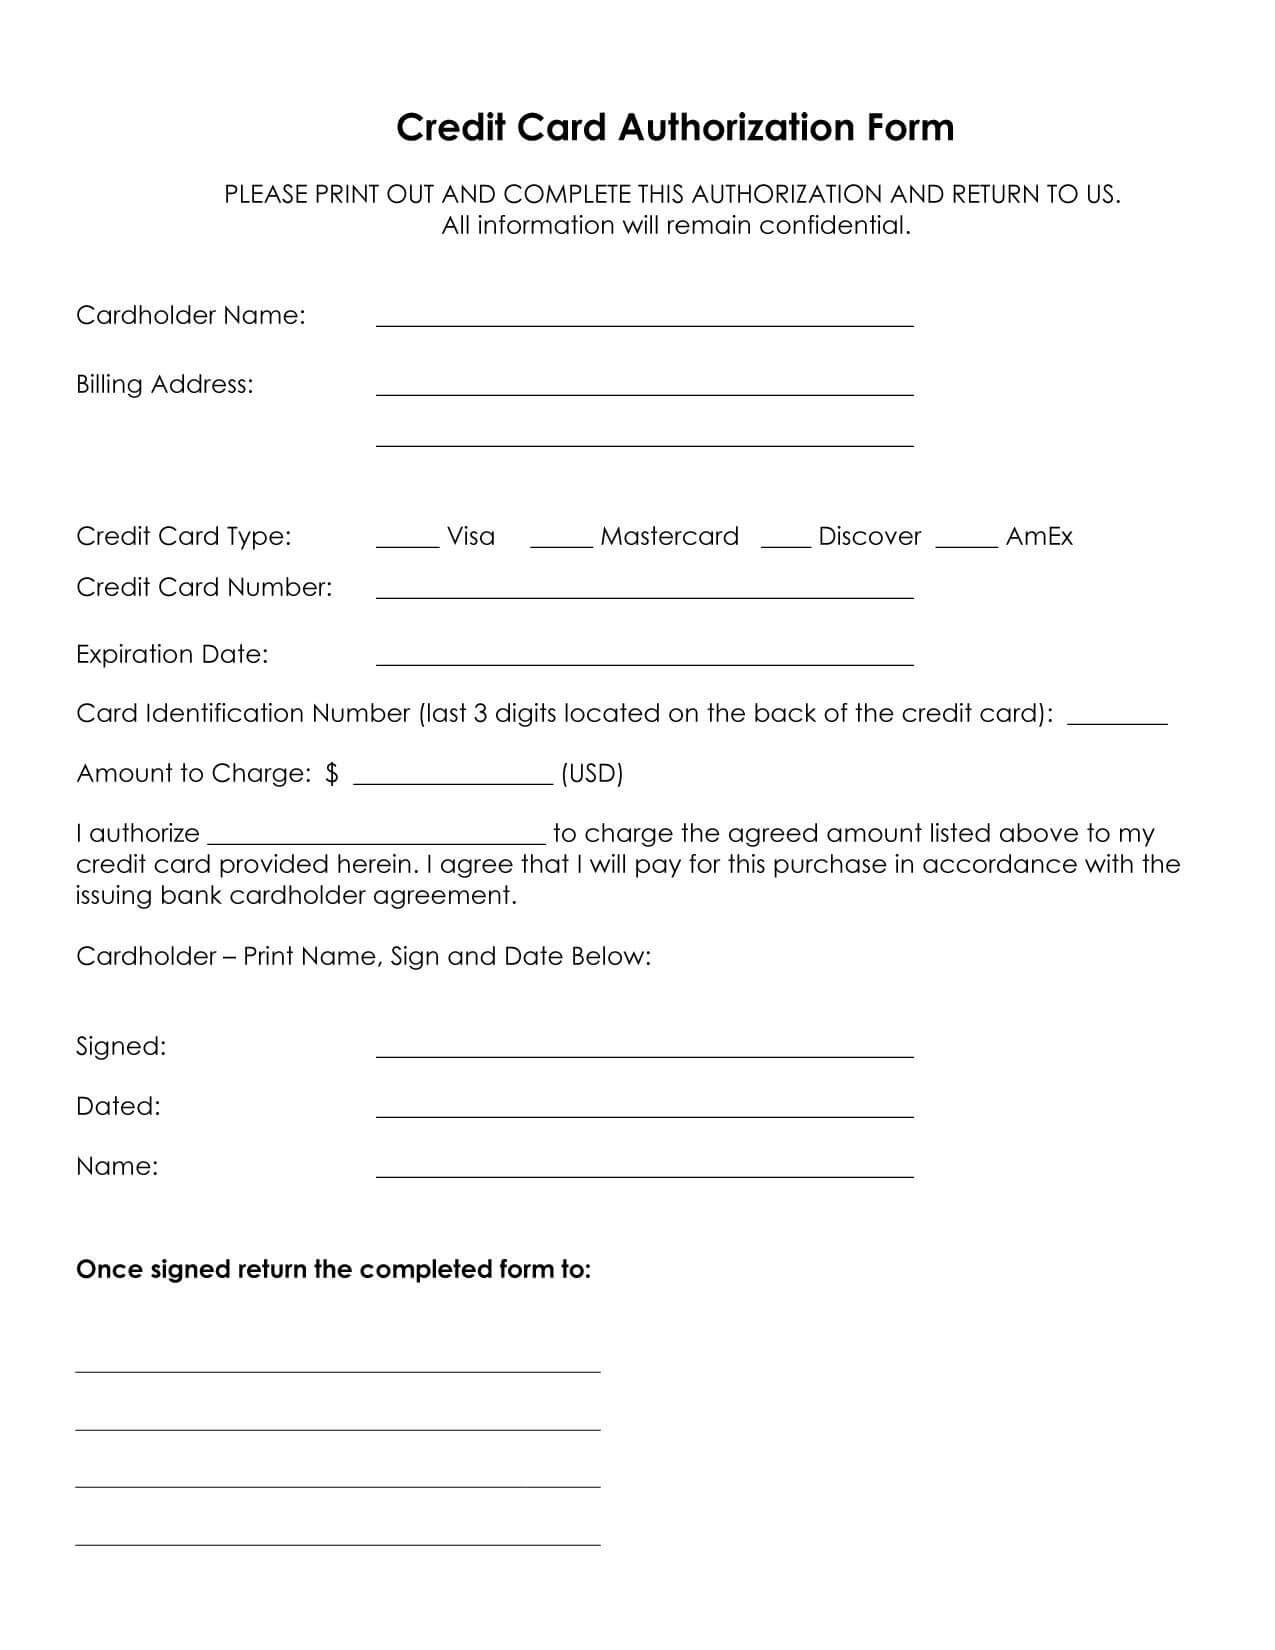 Credit Card Authorization Form Template In 2020 | Credit Regarding Order Form With Credit Card Template